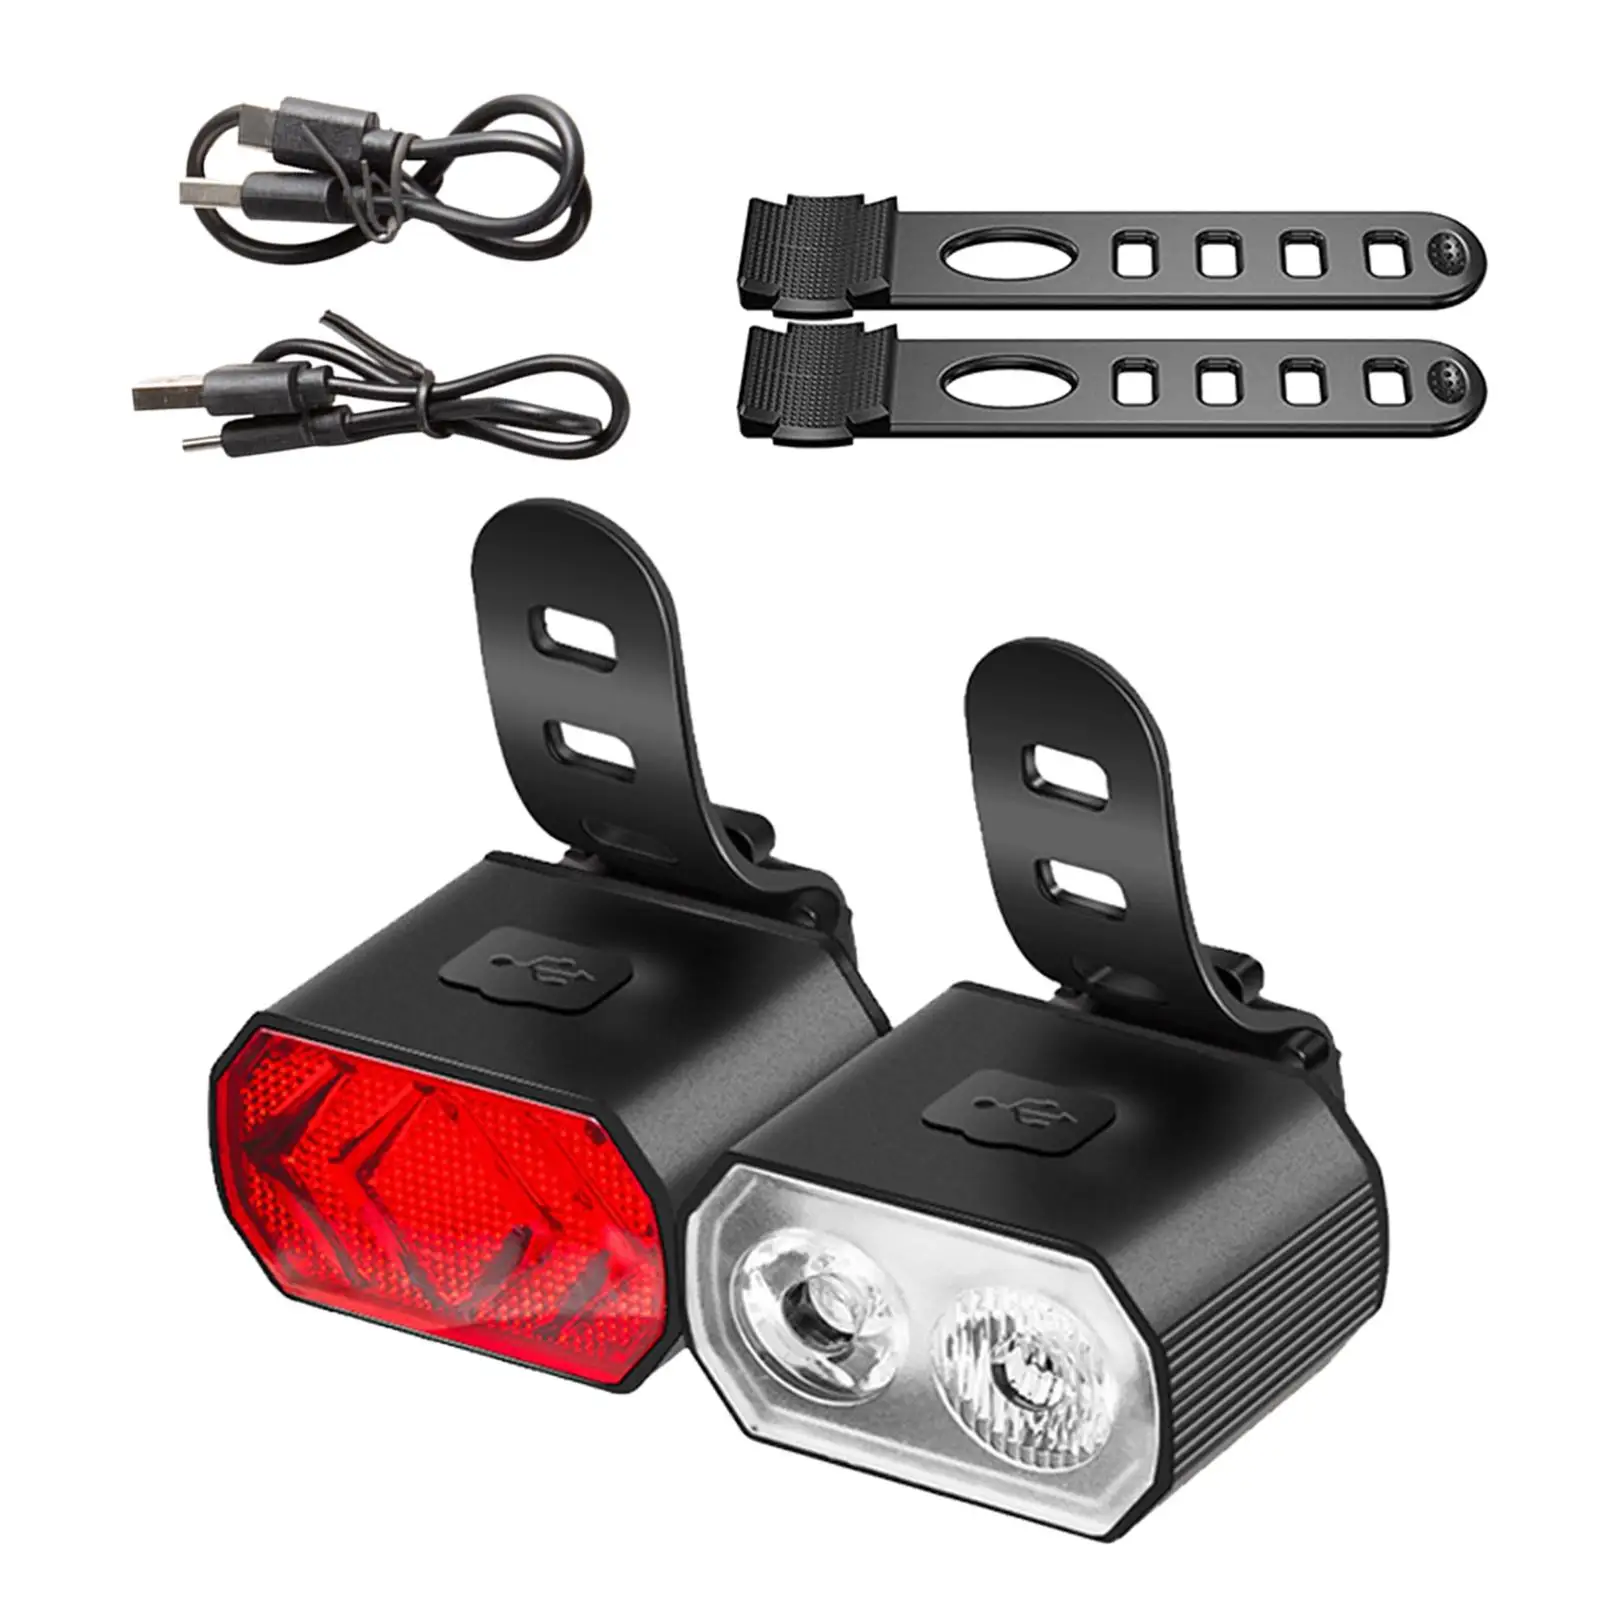 Bicycle Lights Bike Headlight Taillight Front Rear Light Rechargeable Cycling Lamp Aluminum Alloy Warning Lamp Bike Accessories